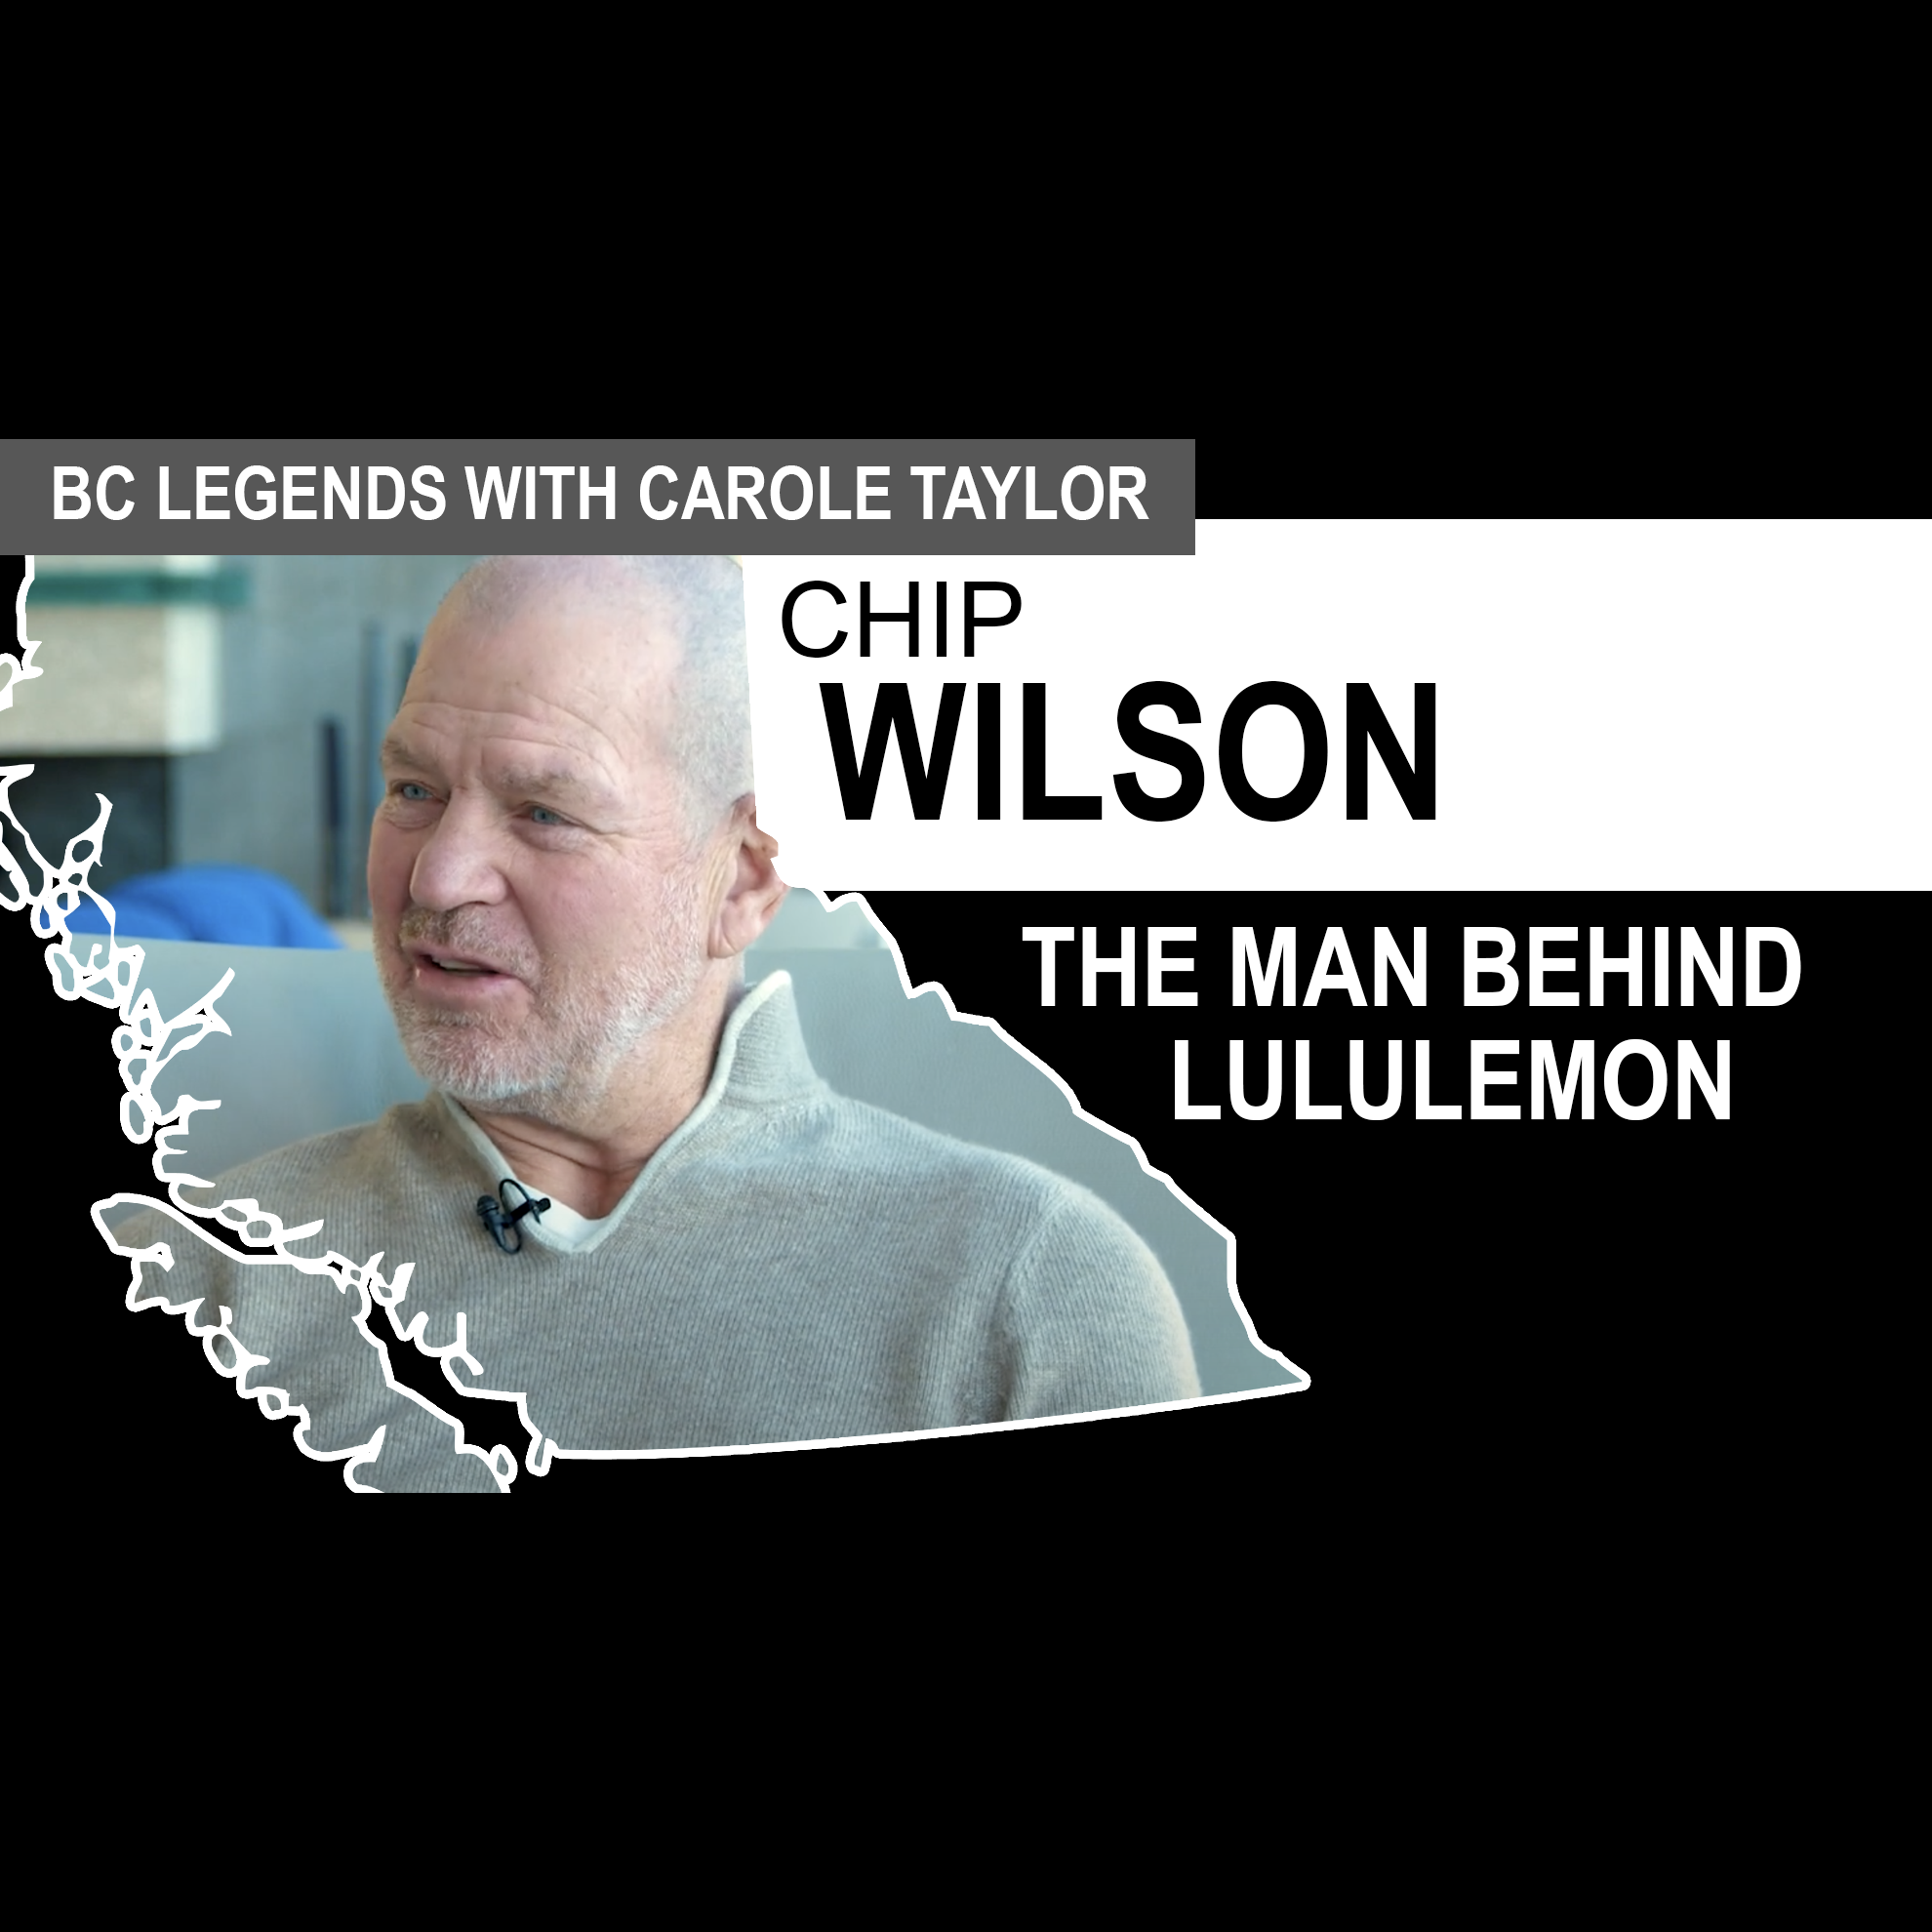 BC Legends with Carole Taylor - Chip Wilson